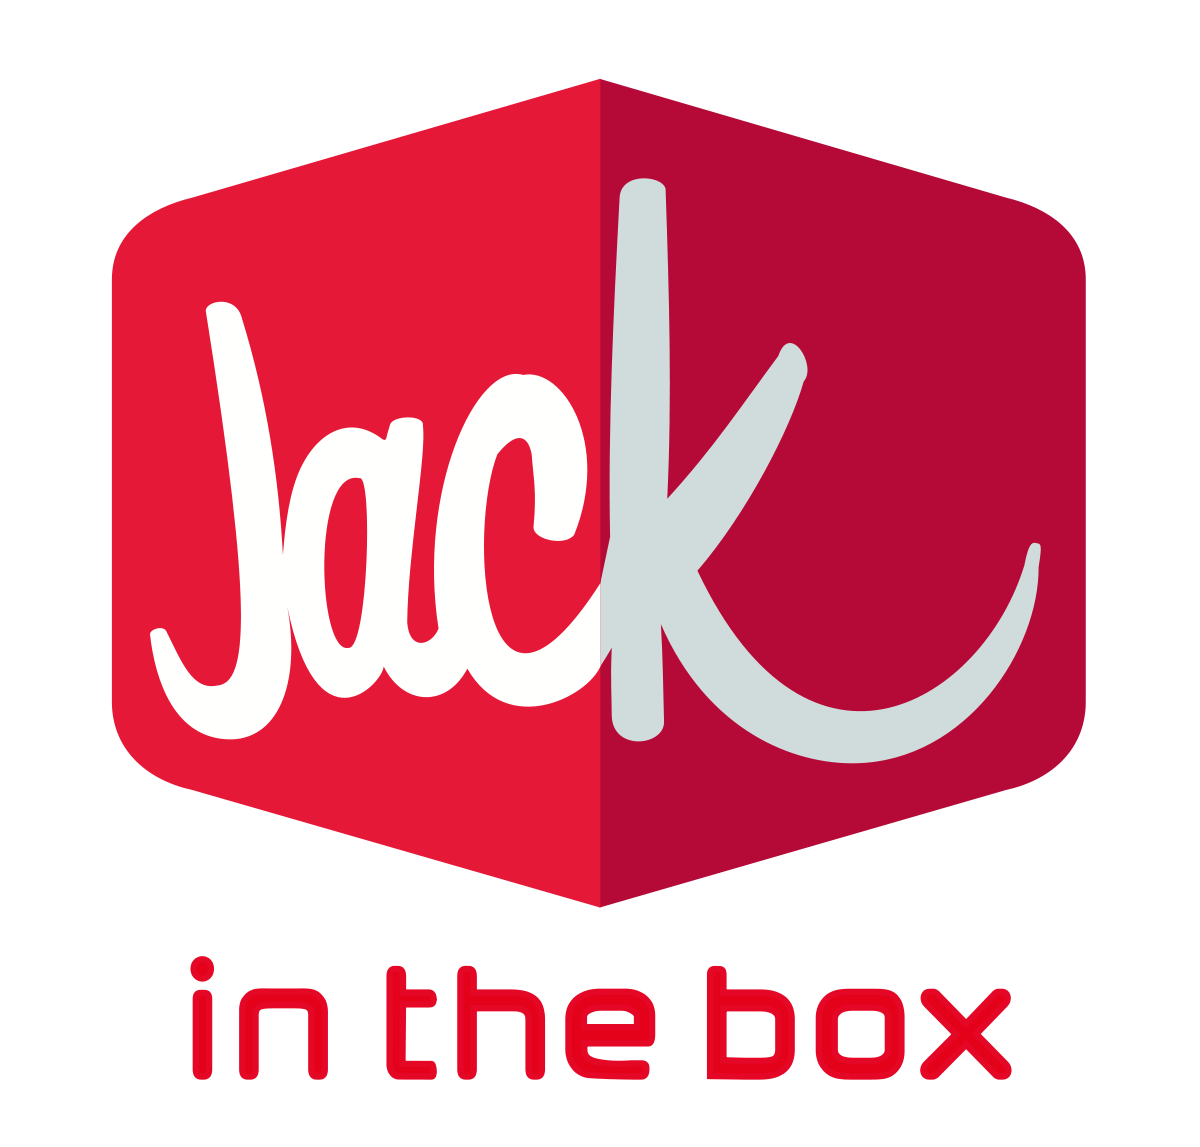 Junk Food Brand Logo - Jack in the Box